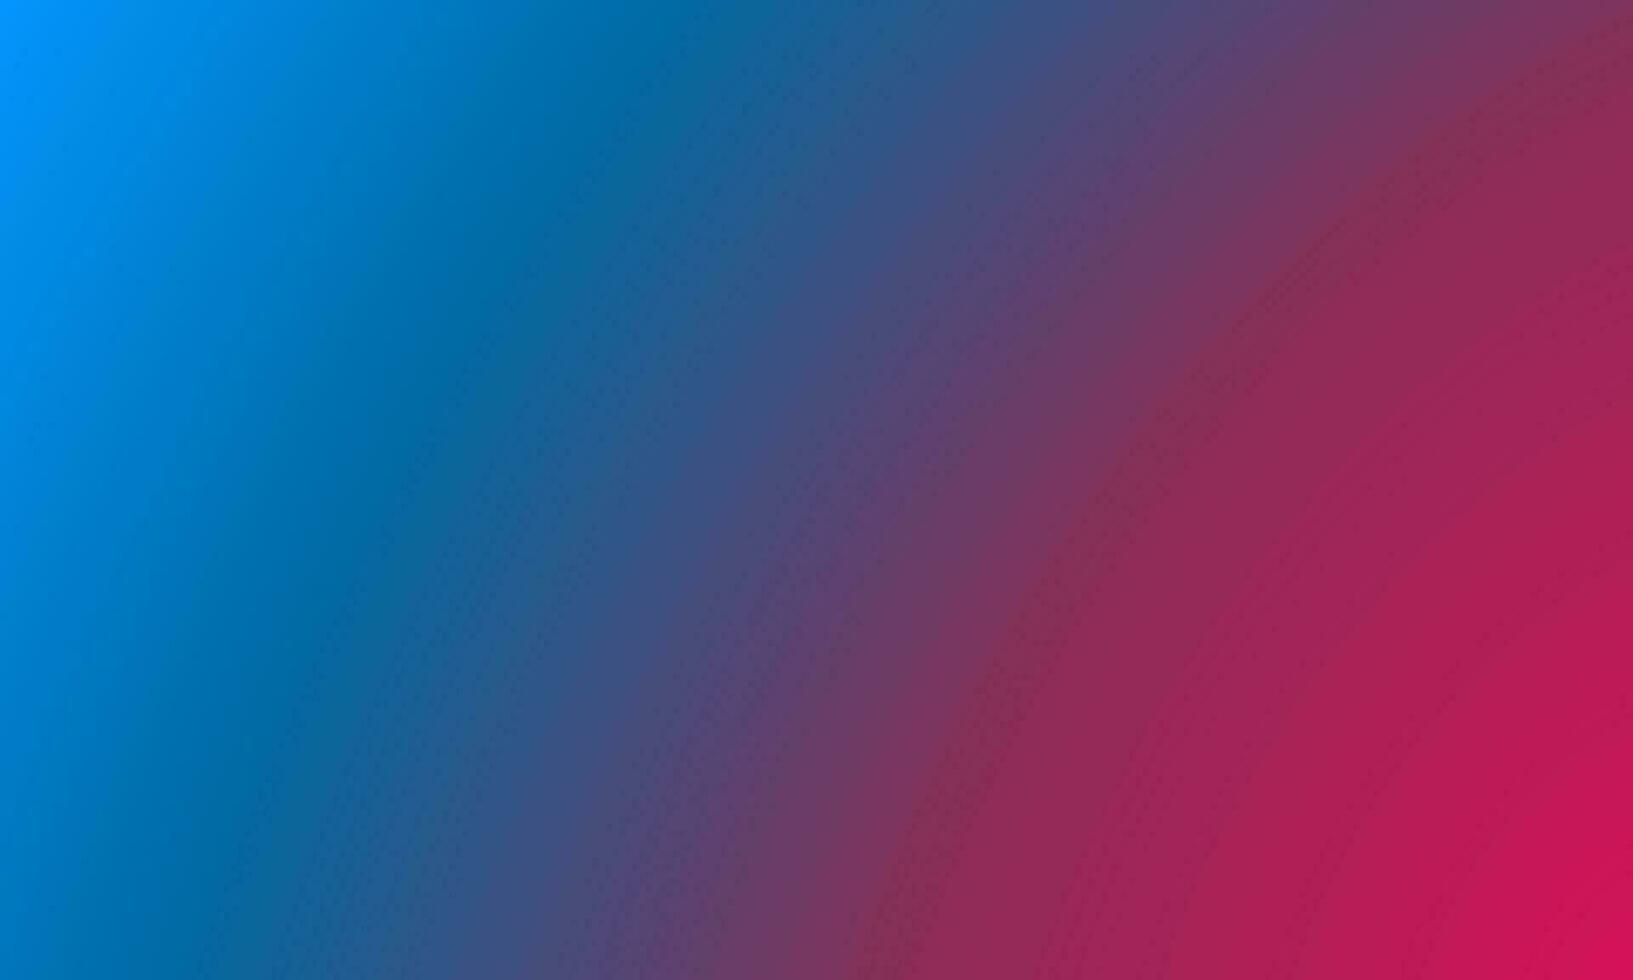 Abstract blurred gradient mesh background vector. Modern smooth design template on soft blue, red colors blend. Suitable for poster, wallpaper, banner, decoration, cover, website, digital vector